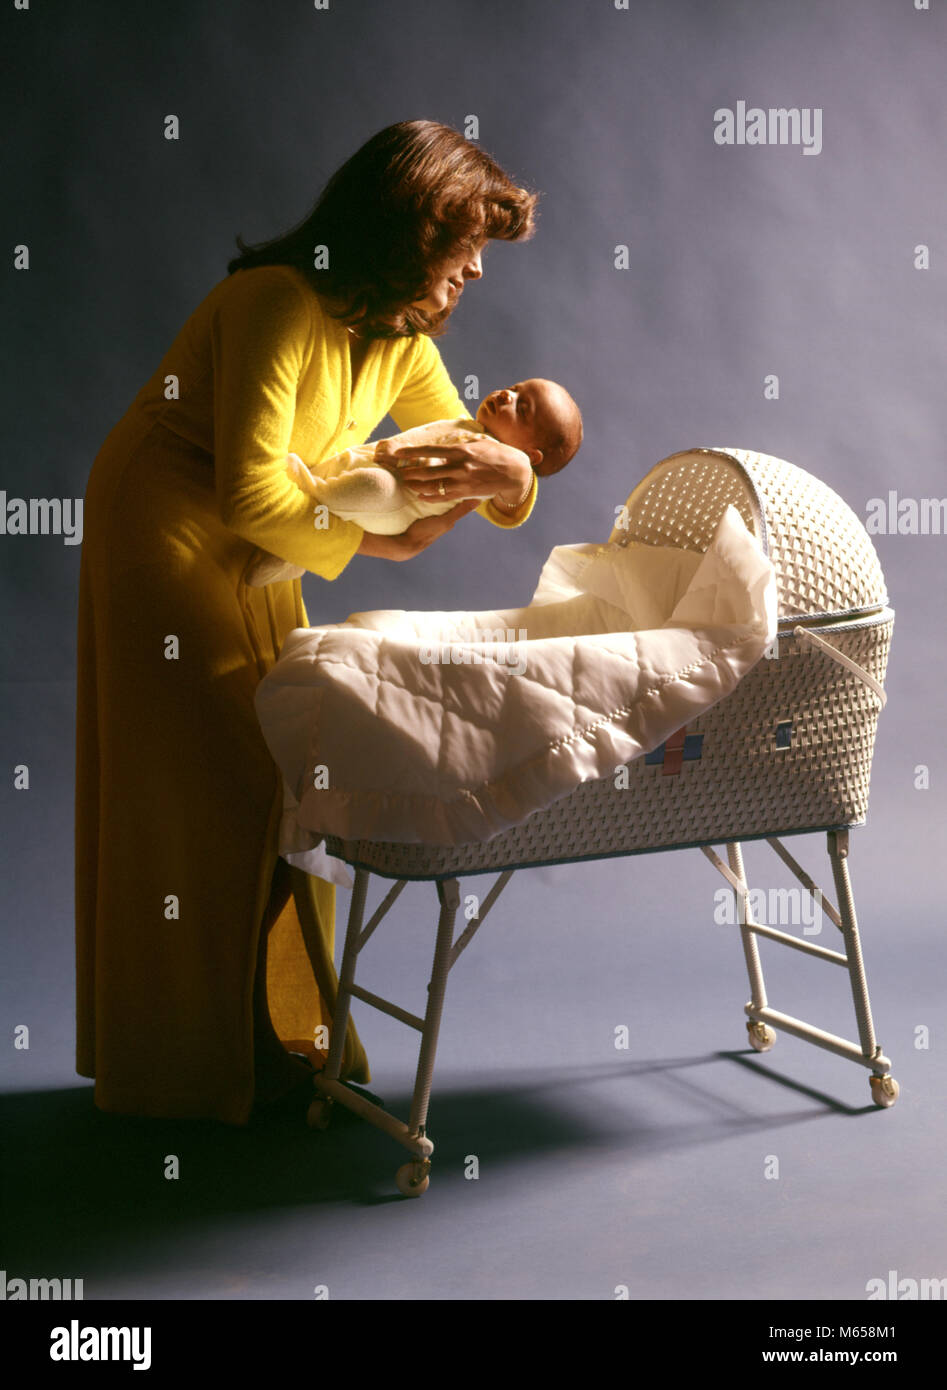 1970s MOTHER WEARING YELLOW ROBE PUTTING BABY CHILD TO SLEEP IN WHITE WOVEN WICKER BASSINET - kb12365 HAR001 HARS BEDTIME CAUCASIAN SONS JOY LIFESTYLE PARENTING FEMALES STUDIO SHOT ROBE HOME LIFE COPY SPACE HALF-LENGTH DAUGHTERS WICKER CARING INDOORS NOSTALGIA TOGETHERNESS 0-1 YEARS 20-25 YEARS 25-30 YEARS SINGLE OBJECT HAPPINESS PROTECTION MOMS CRADLE BASSINET GROWTH CONNECTION CAREGIVER BABY BOY 1-6 MONTHS JUVENILES MALES MID-ADULT MID-ADULT WOMAN NIGHTTIME WOVEN BABY GIRL BASSINETTE CAUCASIAN ETHNICITY GOOD NIGHT OLD FASHIONED PUTTING TO BED TUCKING IN Stock Photo